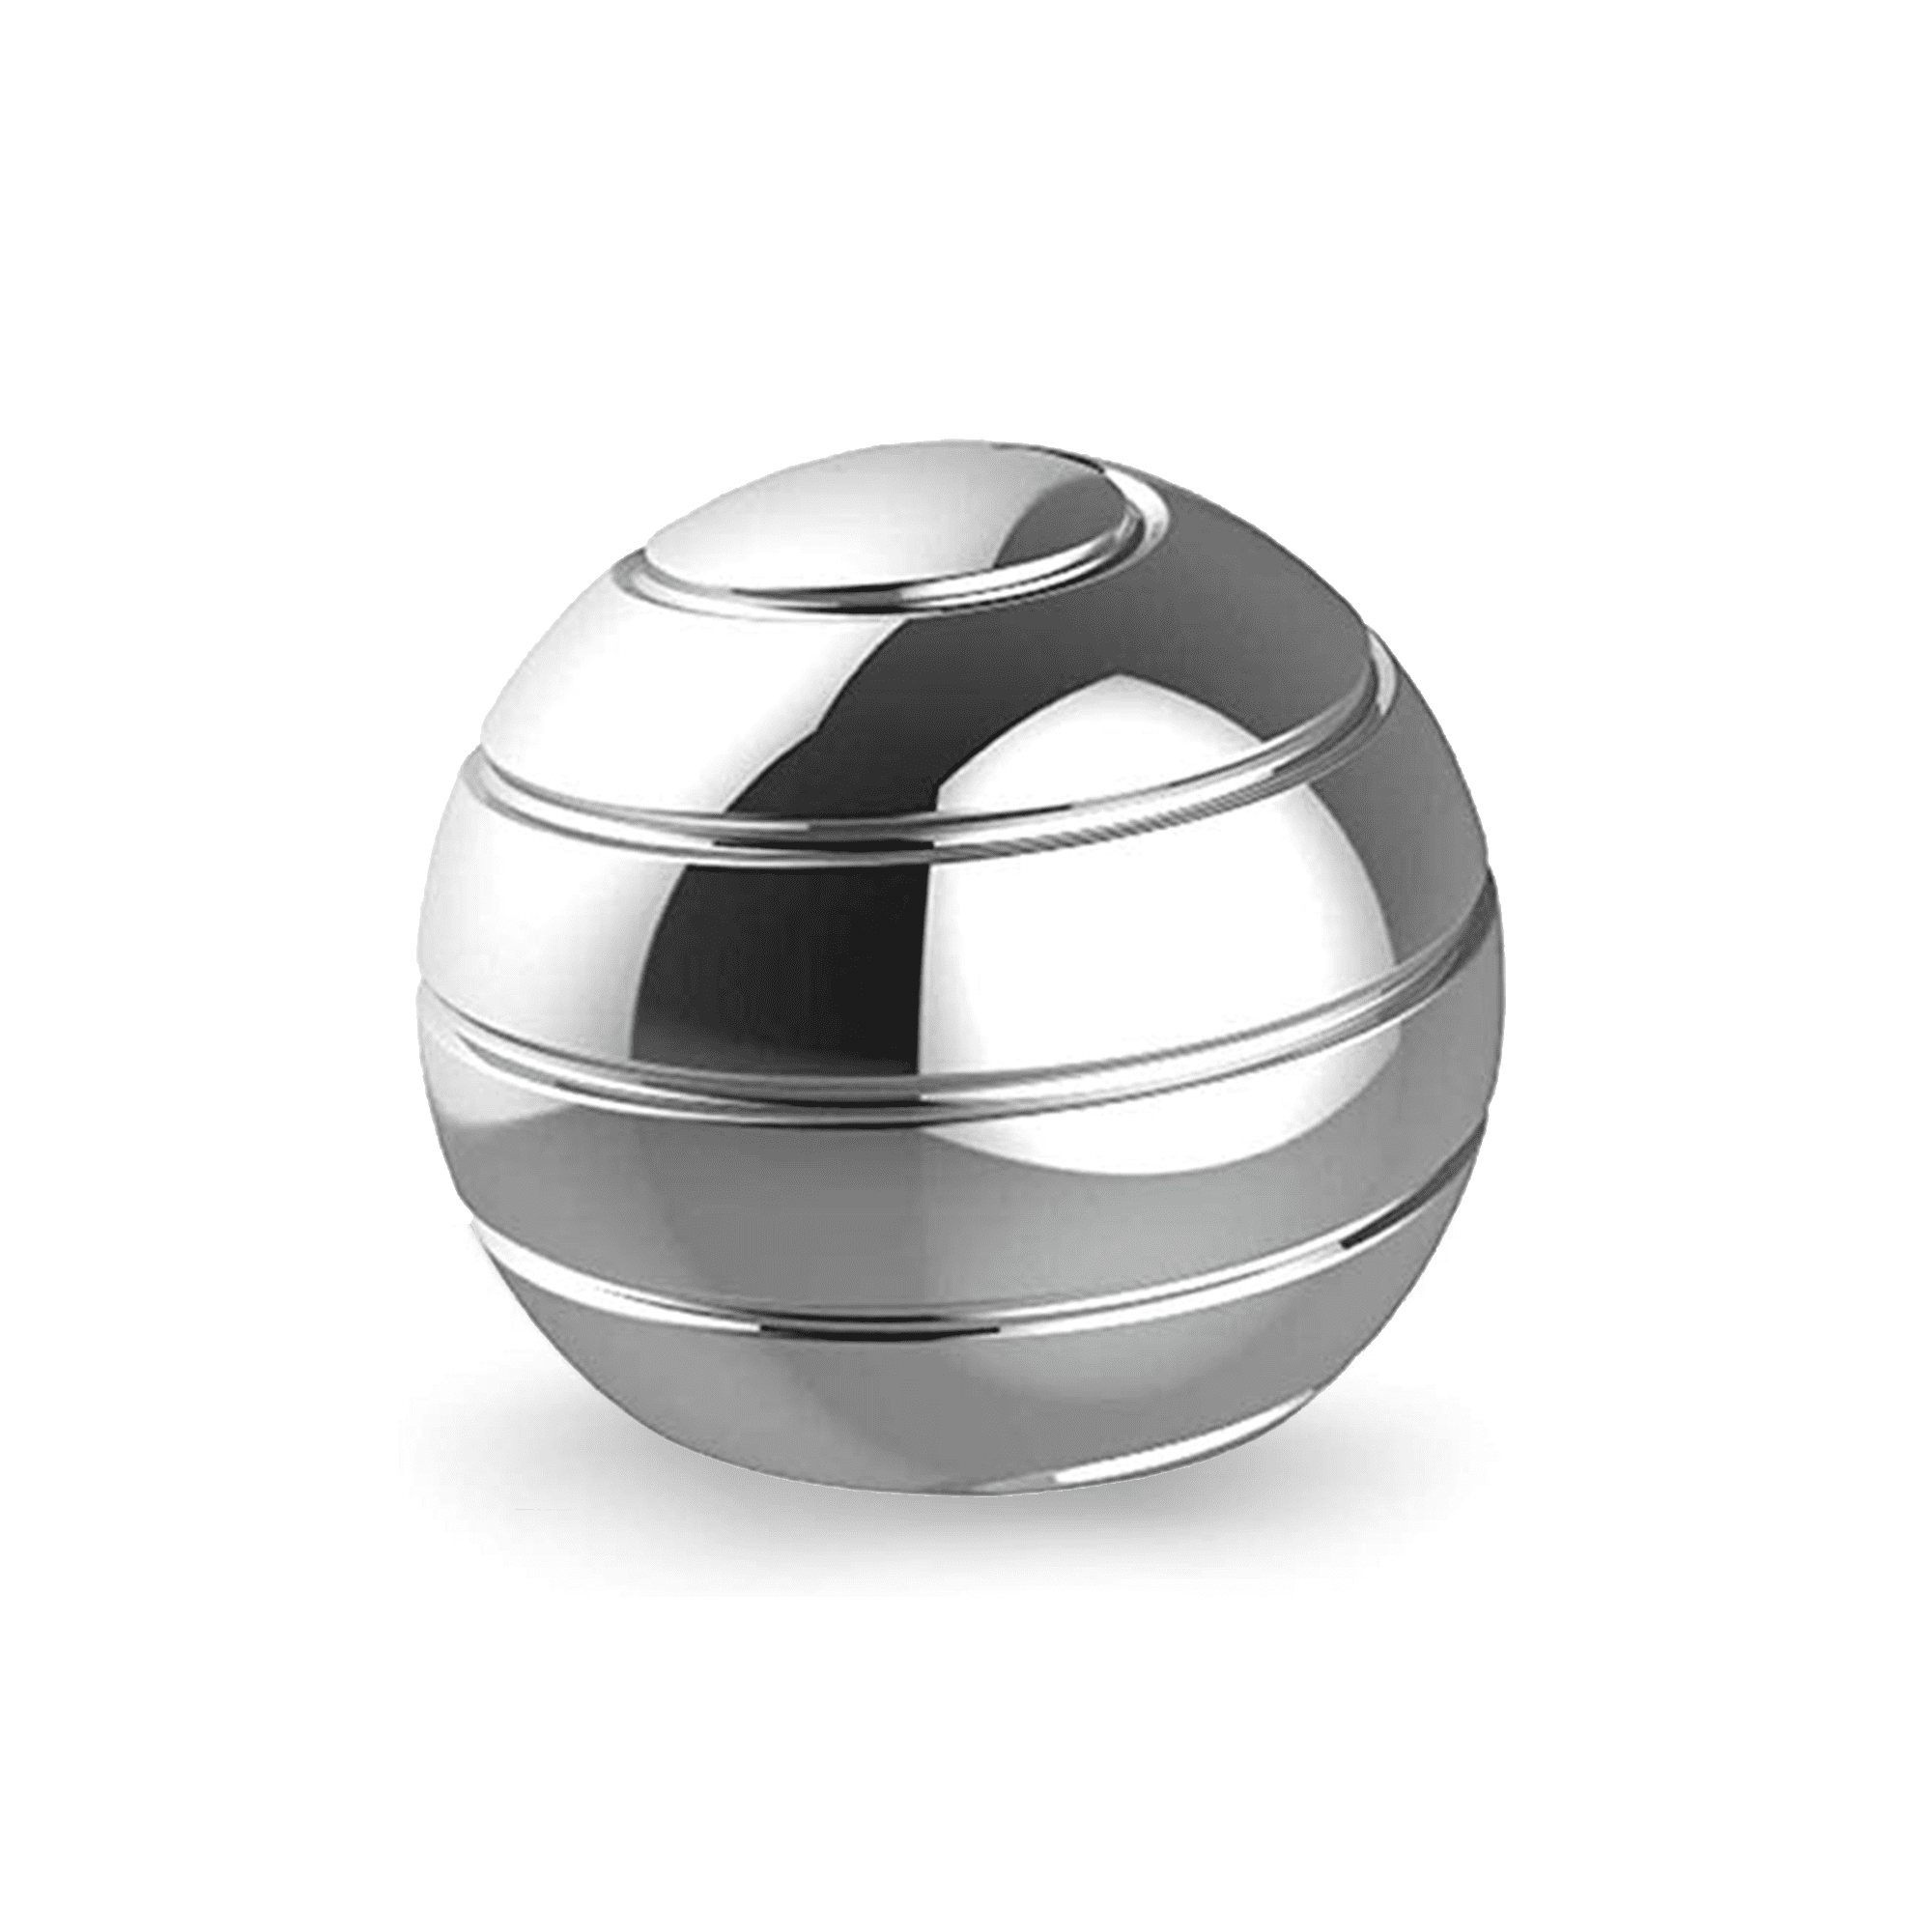 Office Stress Relief Gadget Rose Gold 55mm Four Brothers Kinetic Desktop Ball Toy Optical Illusion Fidget Spinner Ball Aluminium Alloy Optical Illusion Spinner Ball 